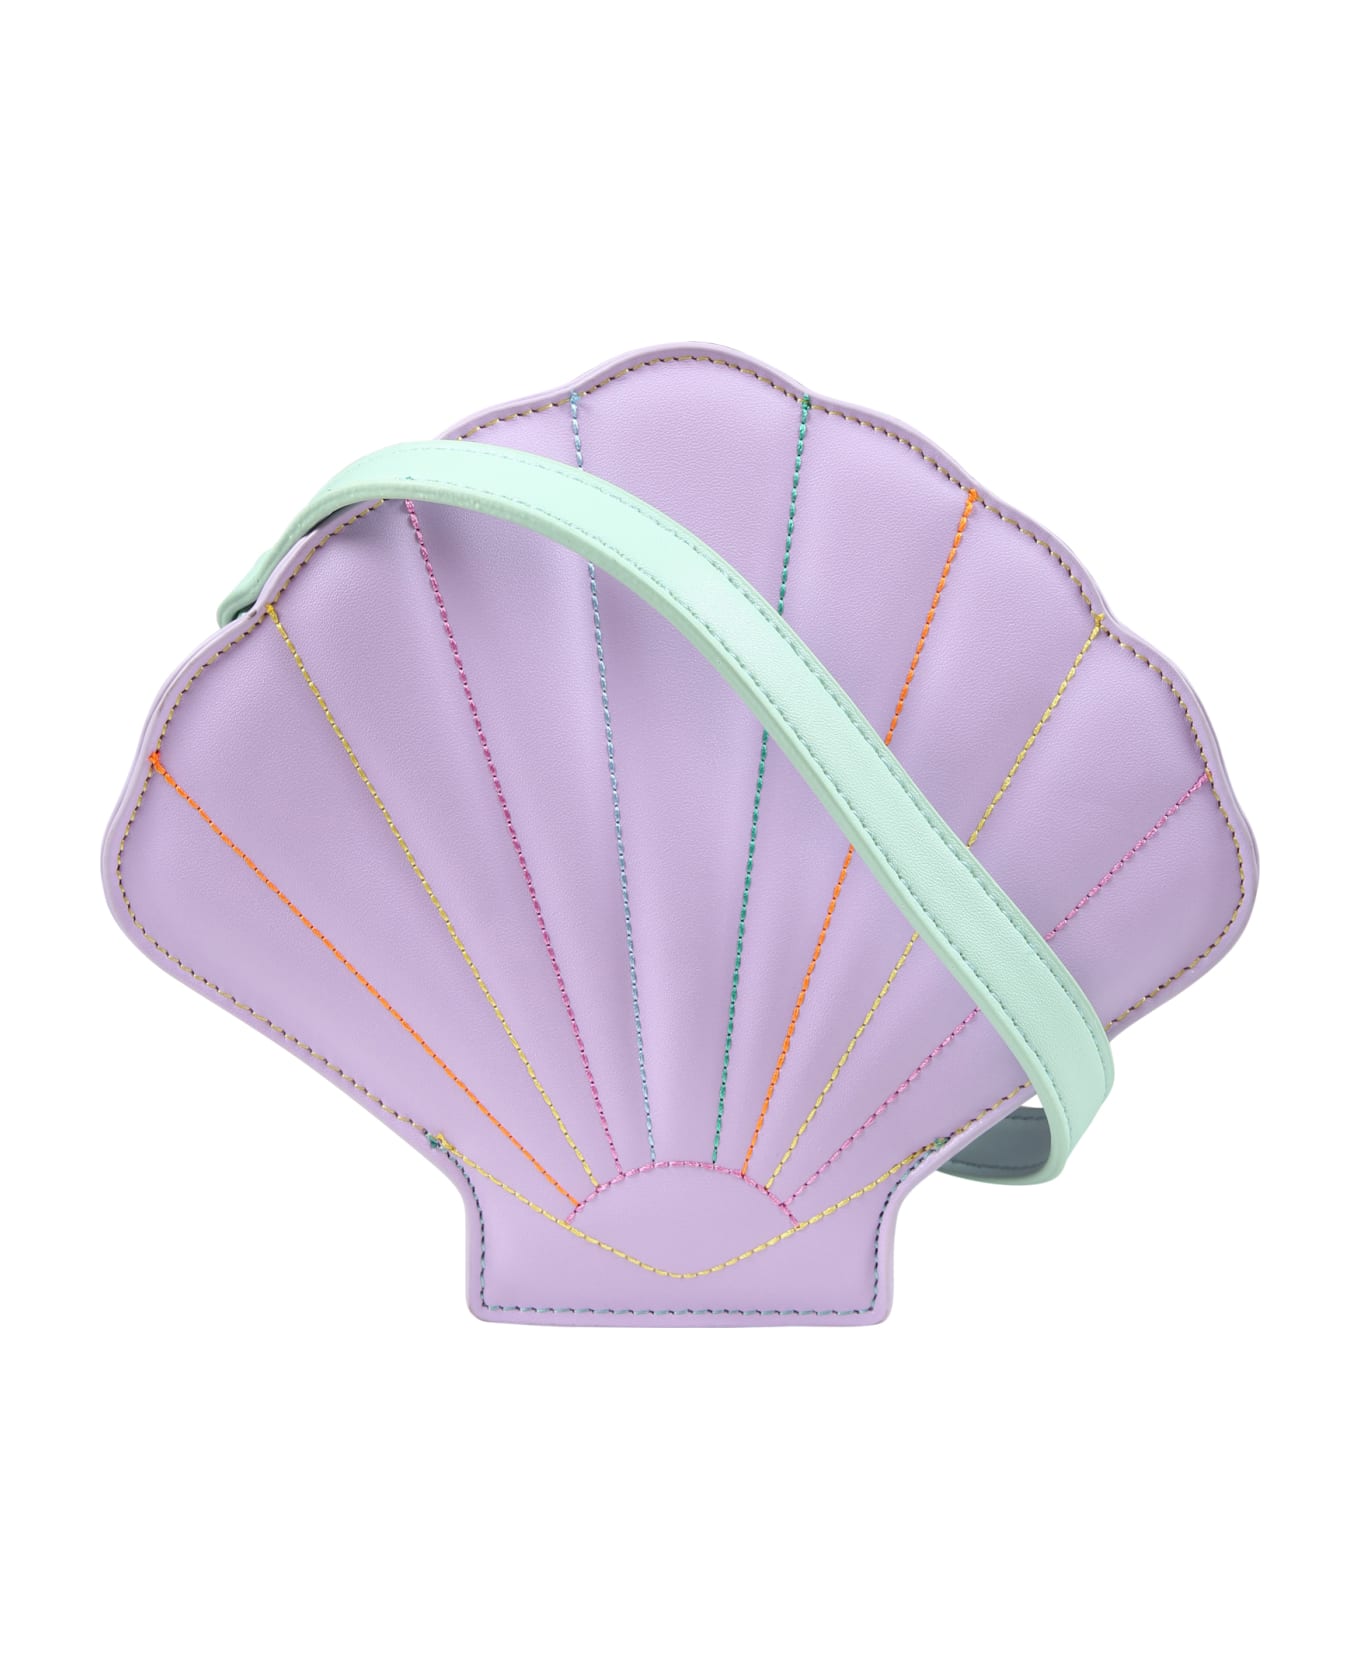 Stella McCartney Kids Purple Bag For Girl With Shell - Violet アクセサリー＆ギフト